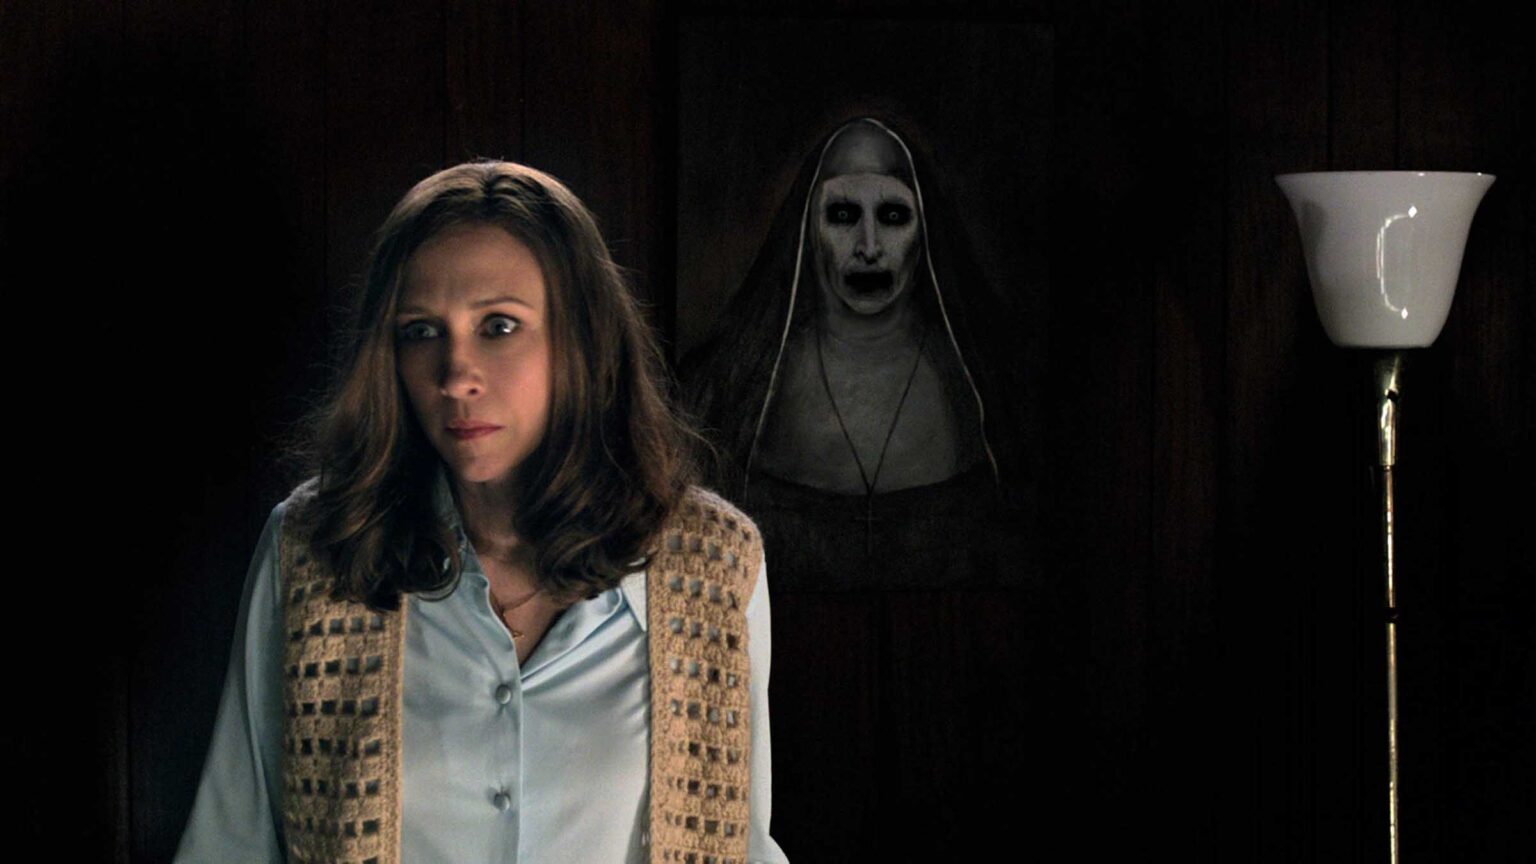 'The Conjuring' series has been on the top of the box office for years, but all the movies in the series draw inspiration from the Warrens.